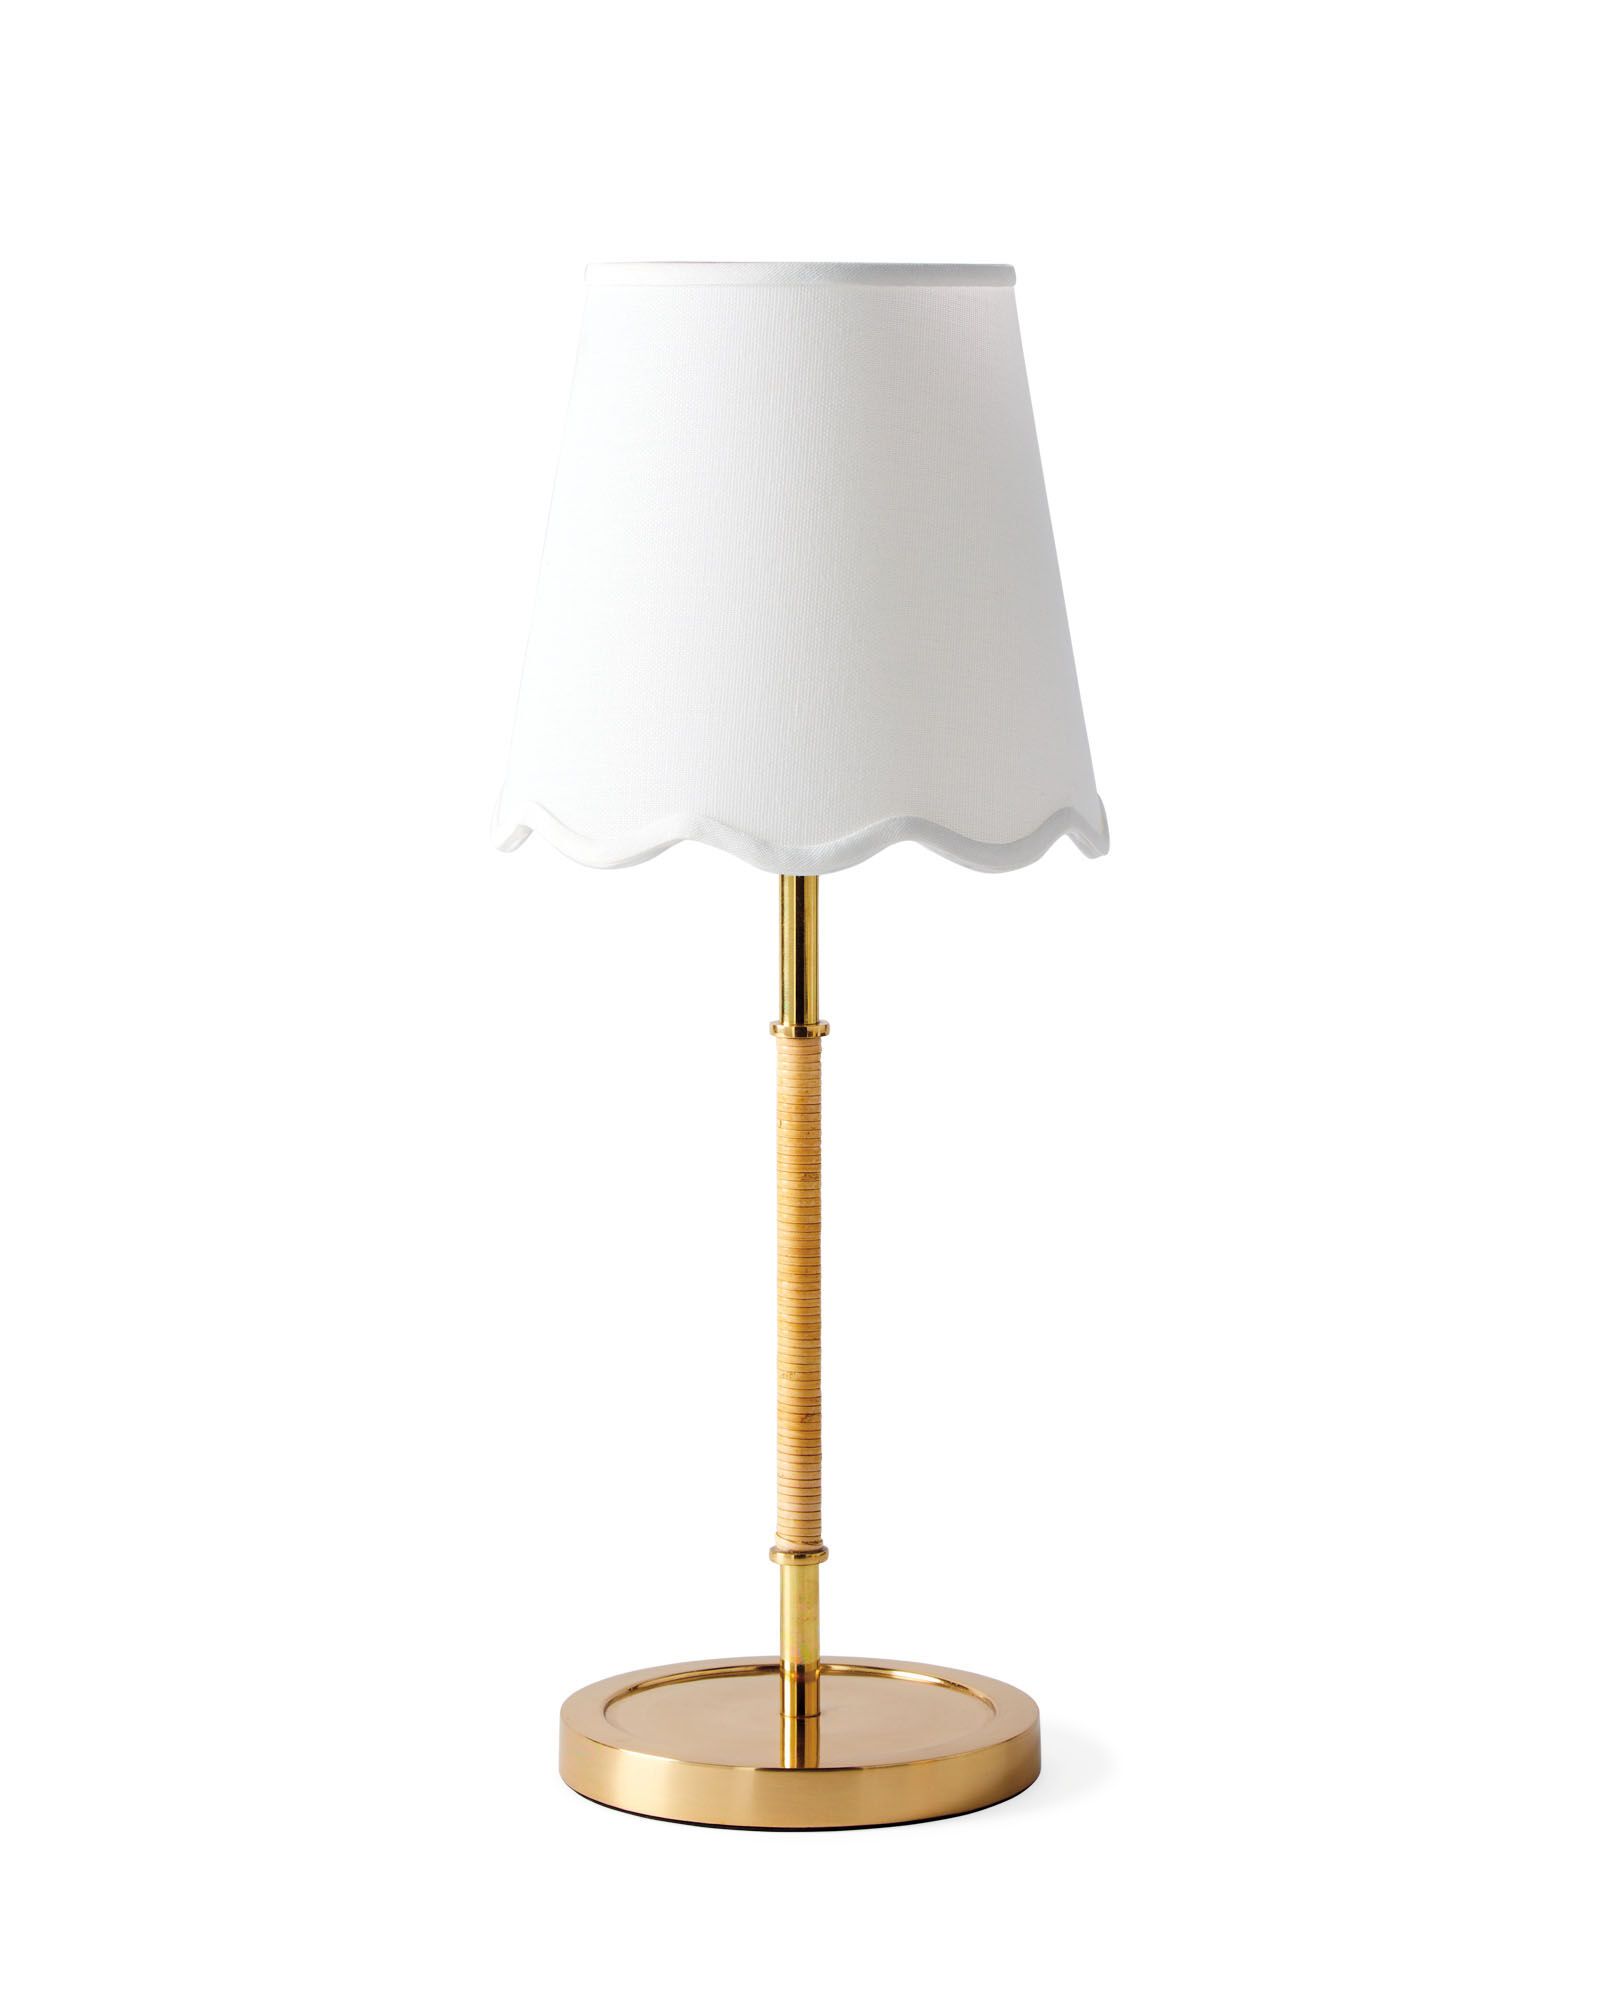 Larkspur Petite Table Lamp | Serena and Lily